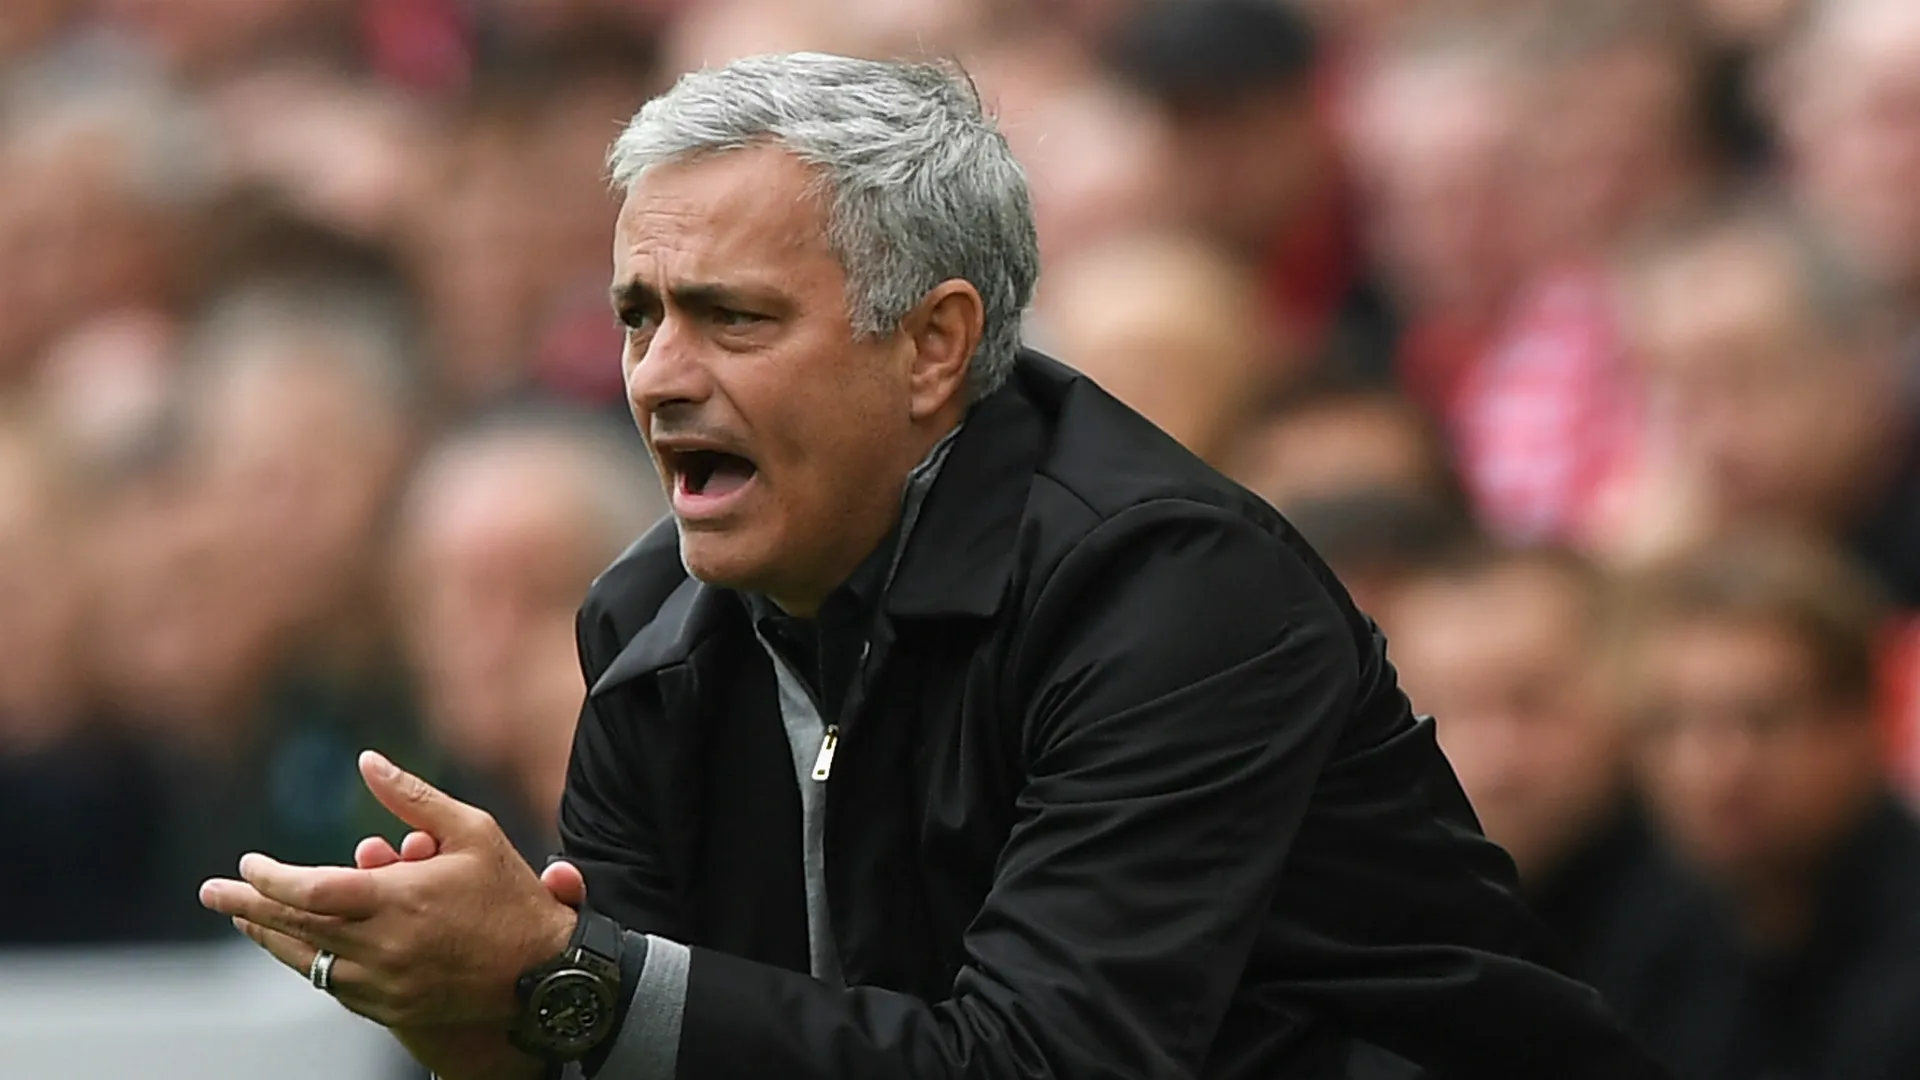 Jose Mourinho makes promise to Manchester United fans ahead of Manchester derby - Bóng Đá